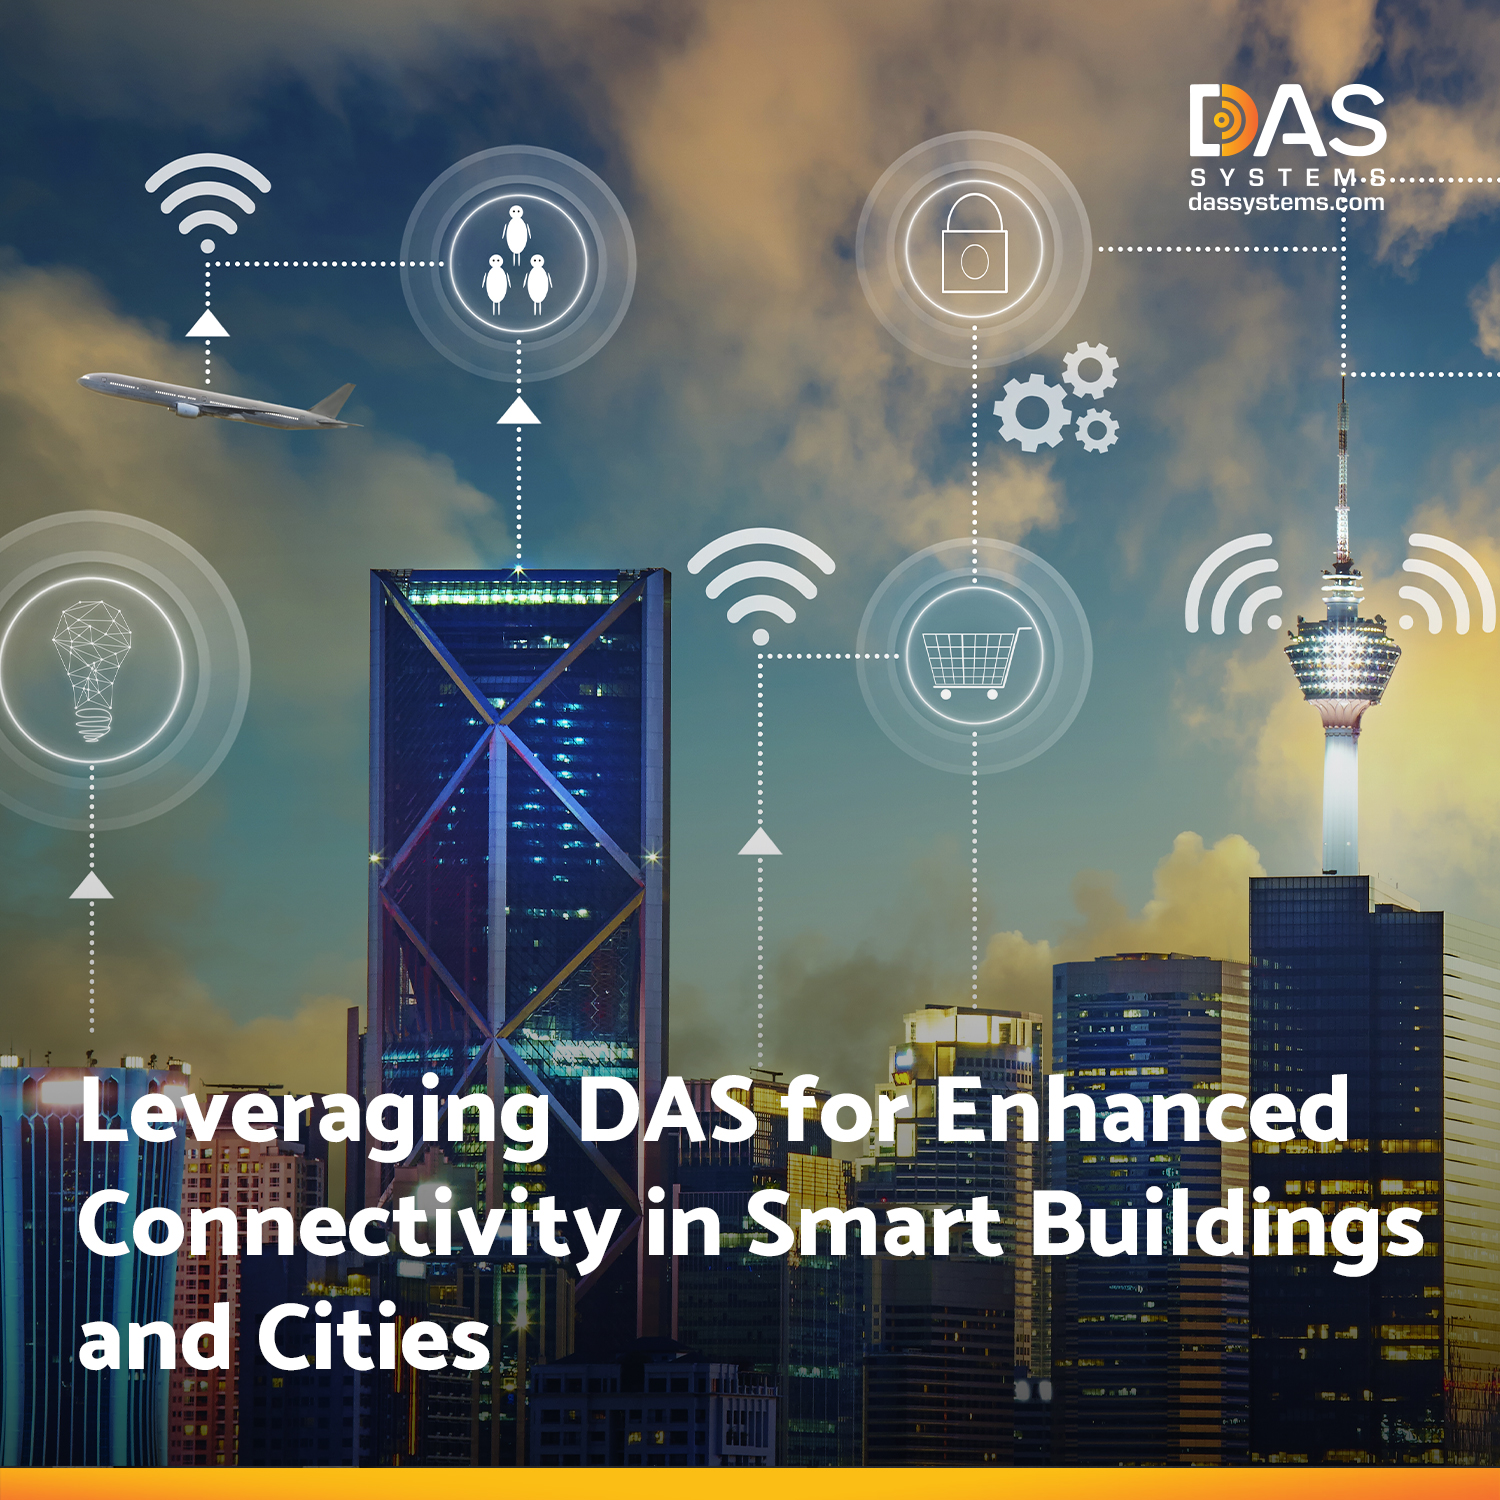 Smart buildings and cities demand robust connectivity. Discover how Distributed Antenna Systems (DAS) unlock enhanced connectivity for a smarter future. Dive into our blog to learn more.